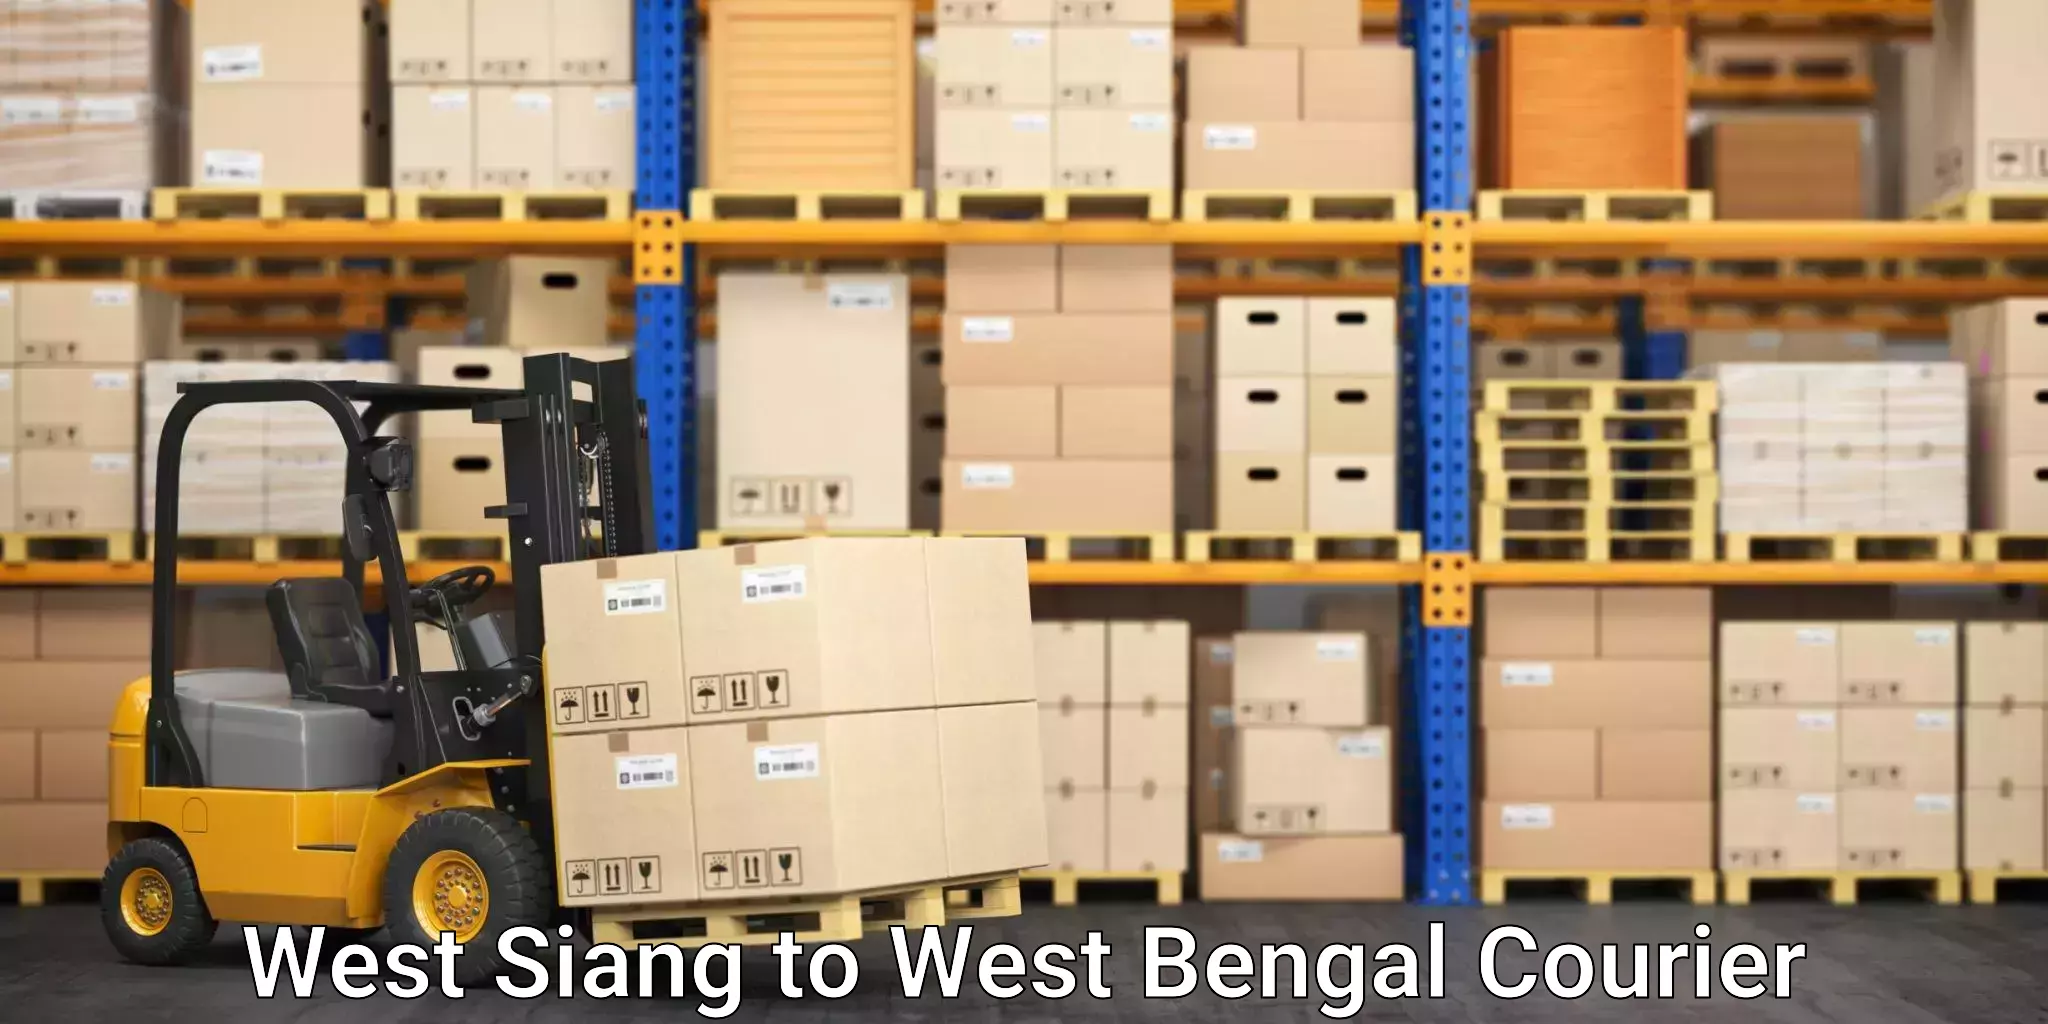 Reliable parcel services West Siang to Hooghly